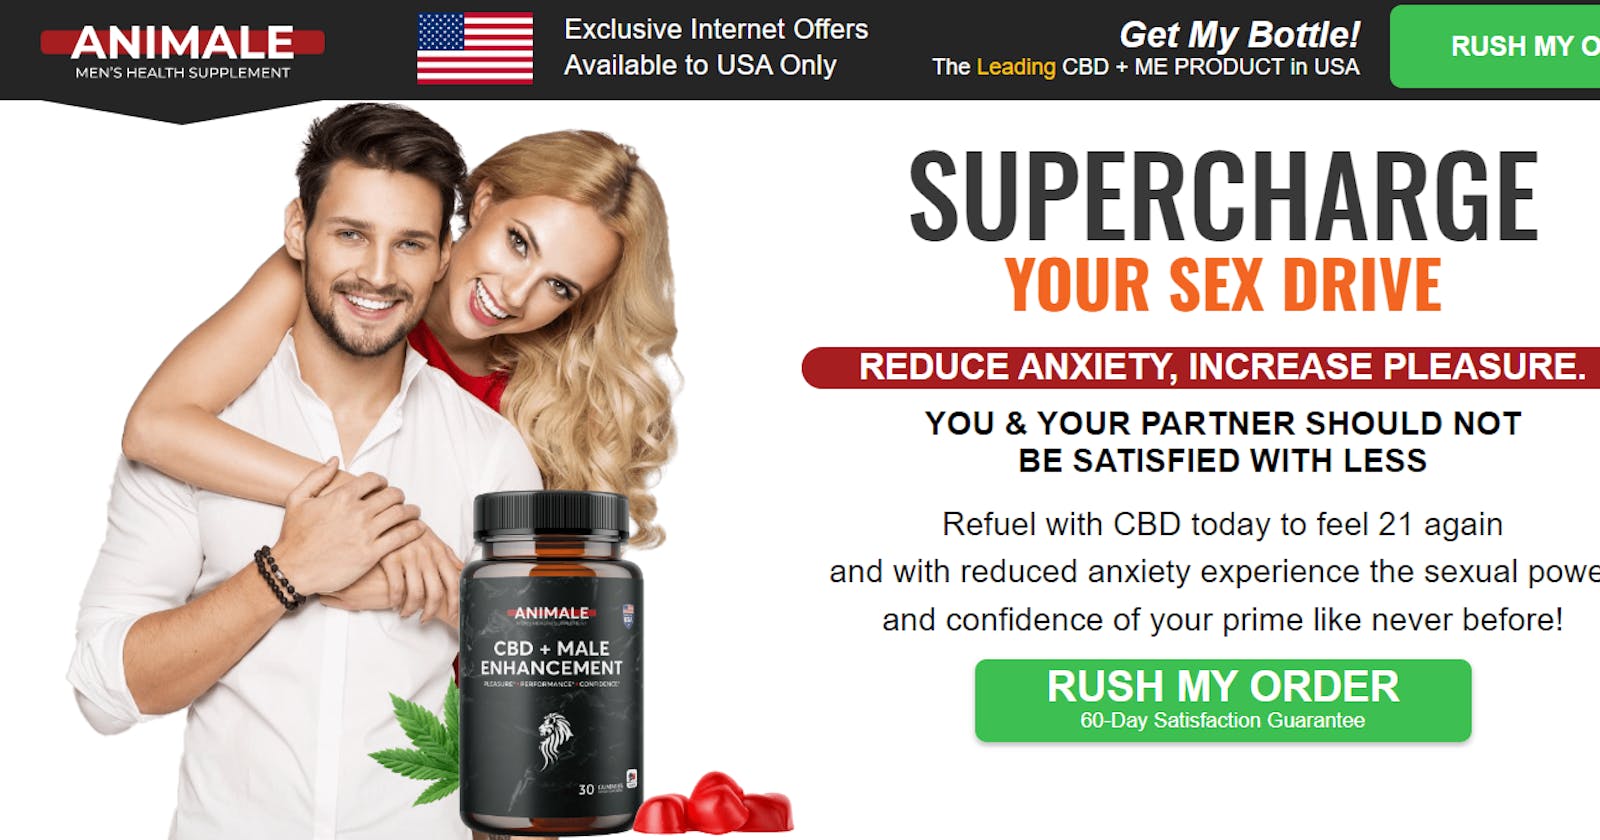 Black Mamba CBD Gummies (Shocking Exposed Fraud) You Need To Know This First Before Buying